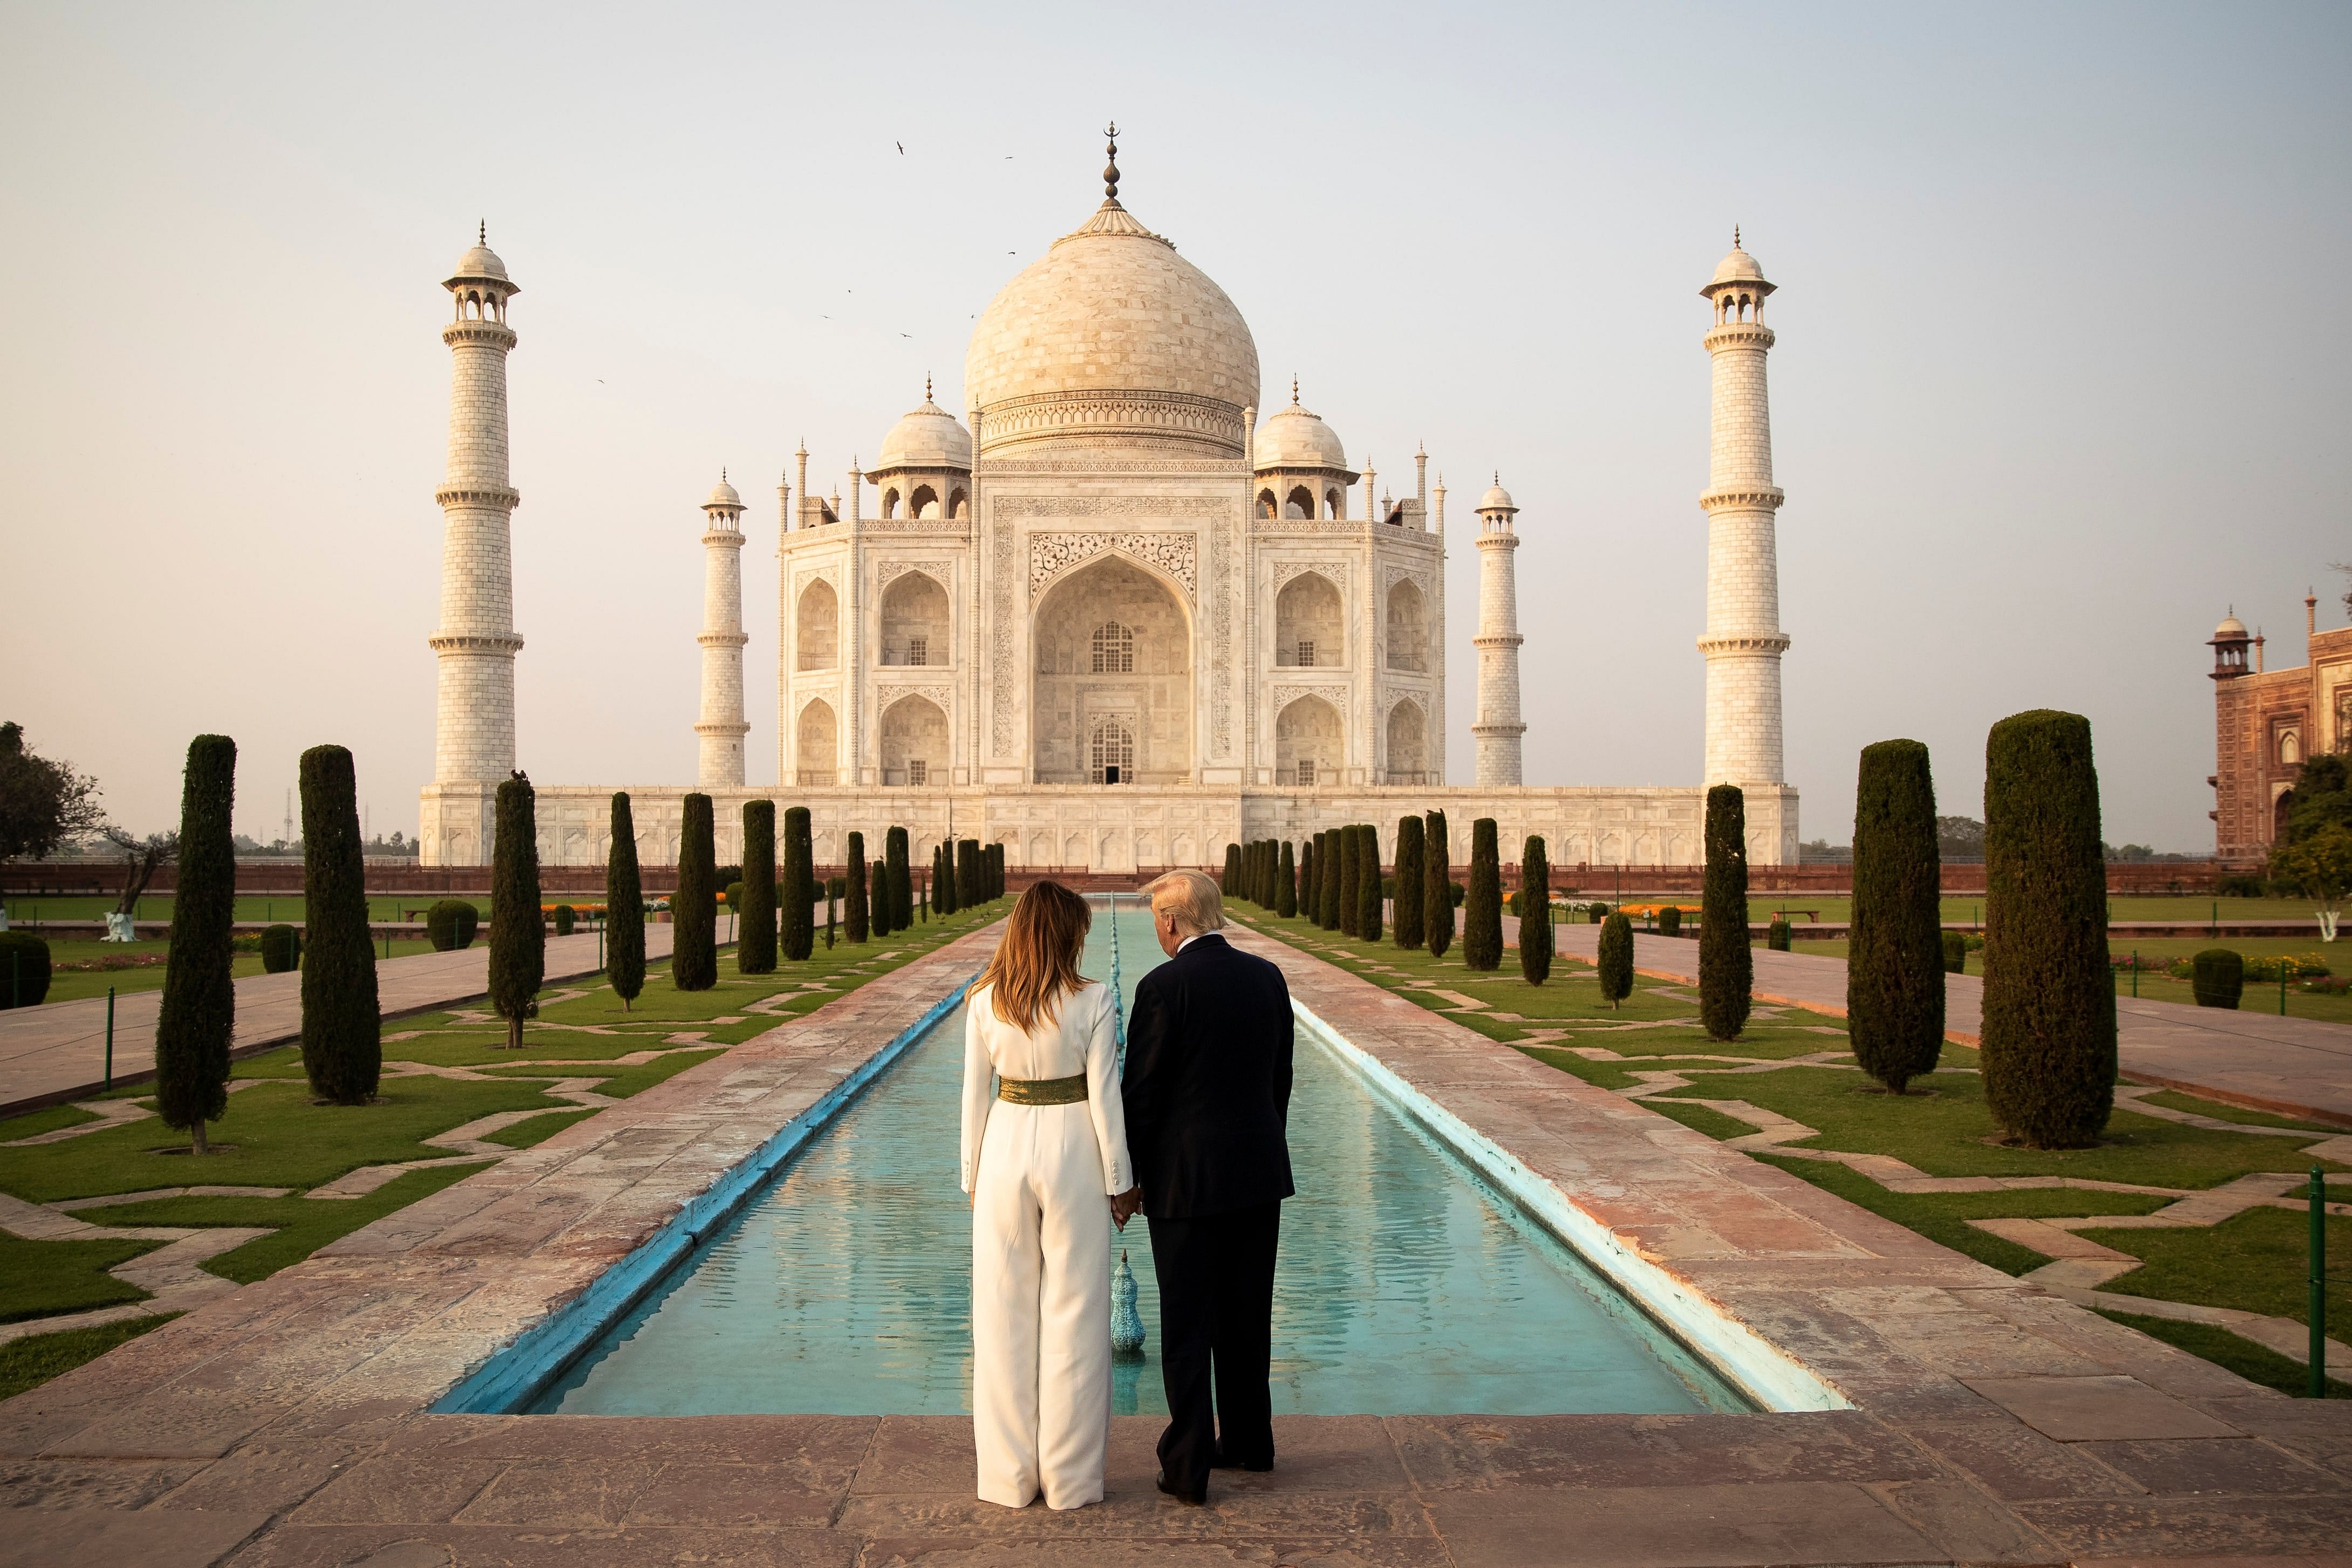 The monument was built over a period of nearly 20 years by Shah Jahan in memory of his wife after her death in 1631. (Credit: Reuters Photo)